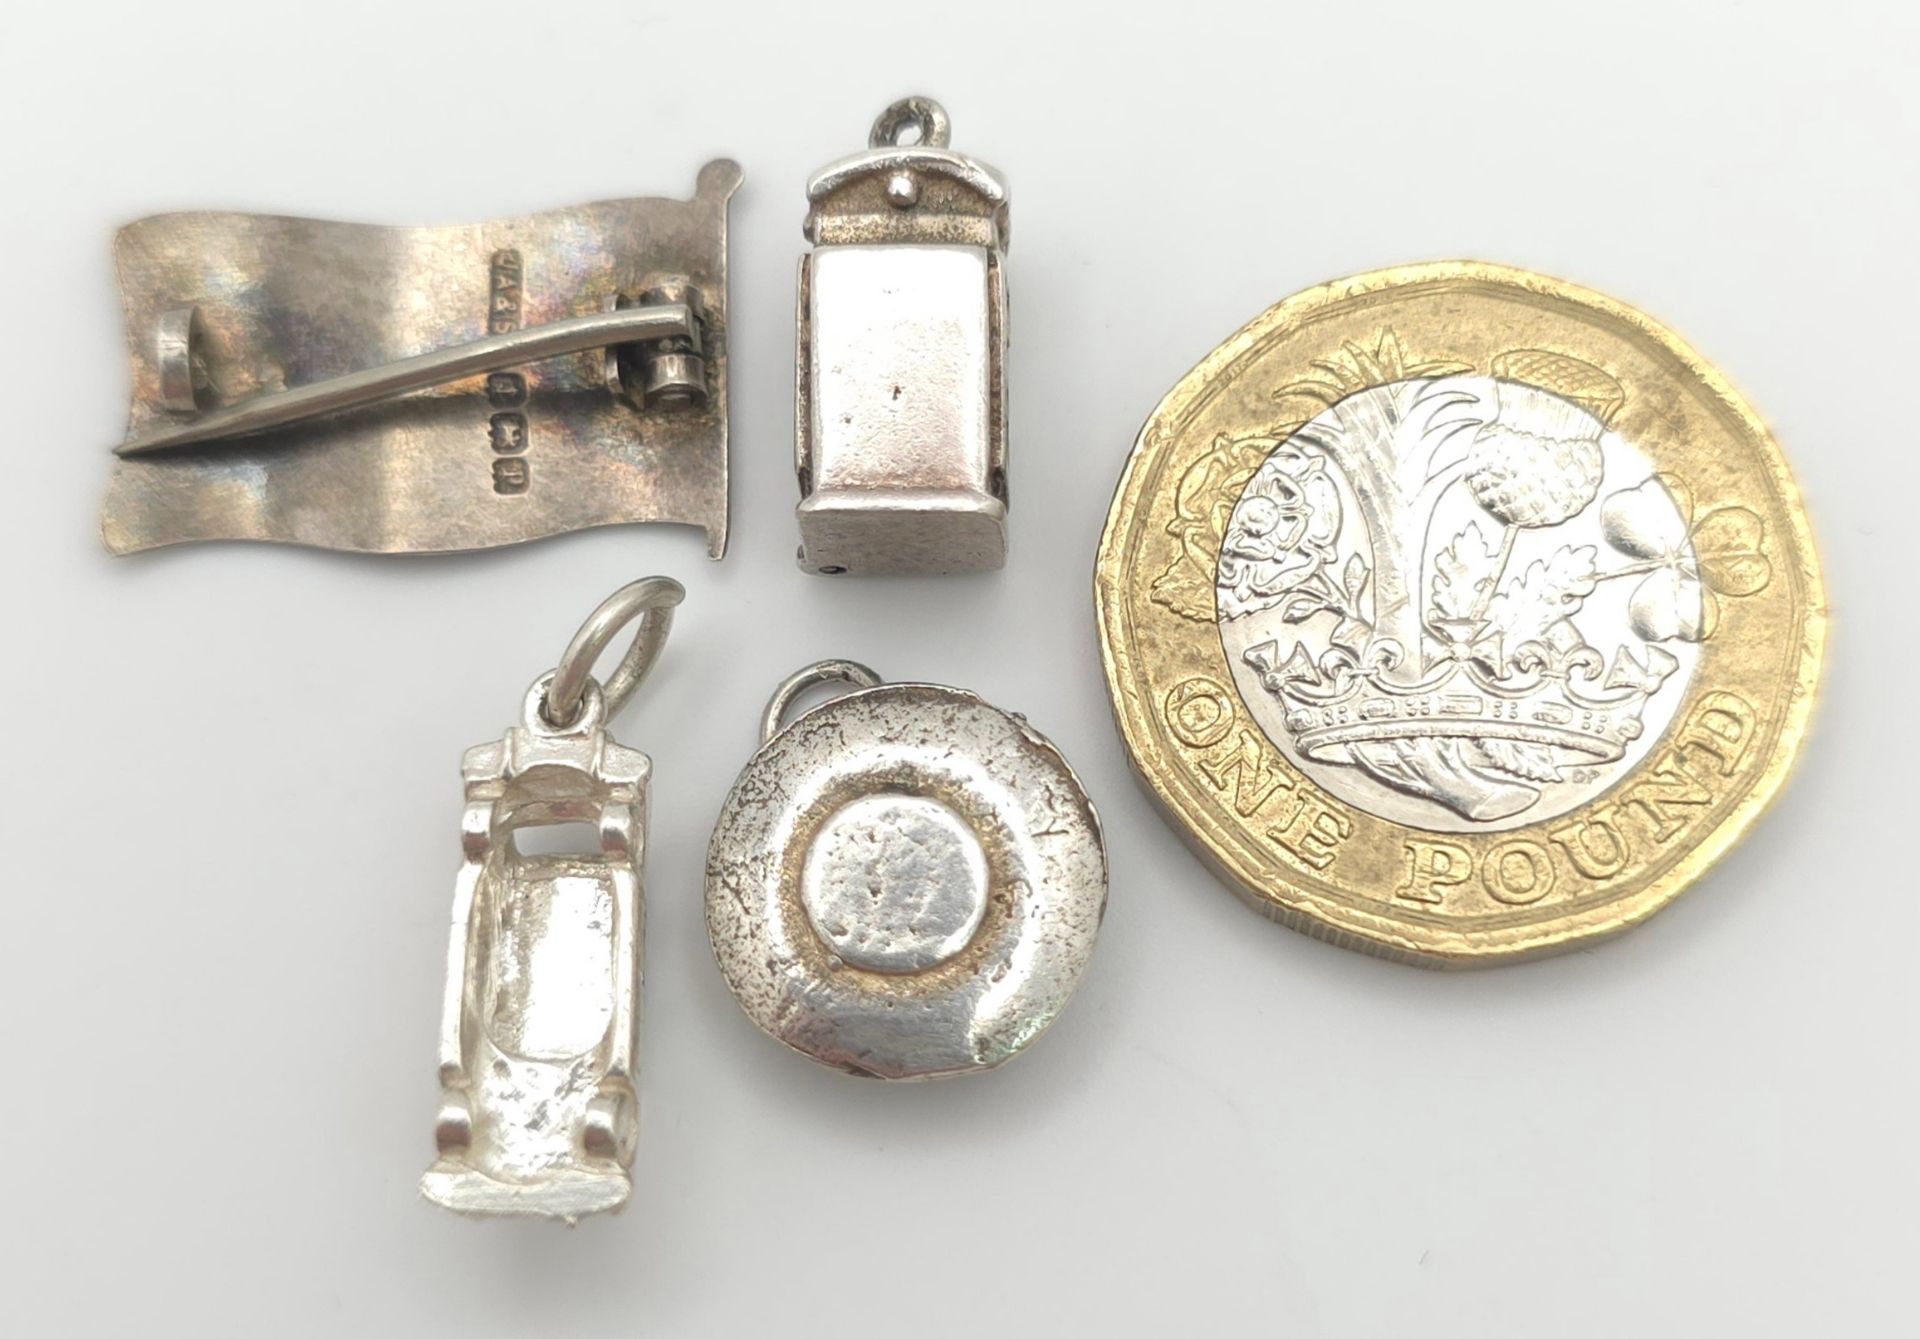 A STERLING SILVER LONDON THEMED COLLECTION OF ITEMS - UNION JACK FLAG BROOCH, CUP OF TEA CHARM, - Image 4 of 5